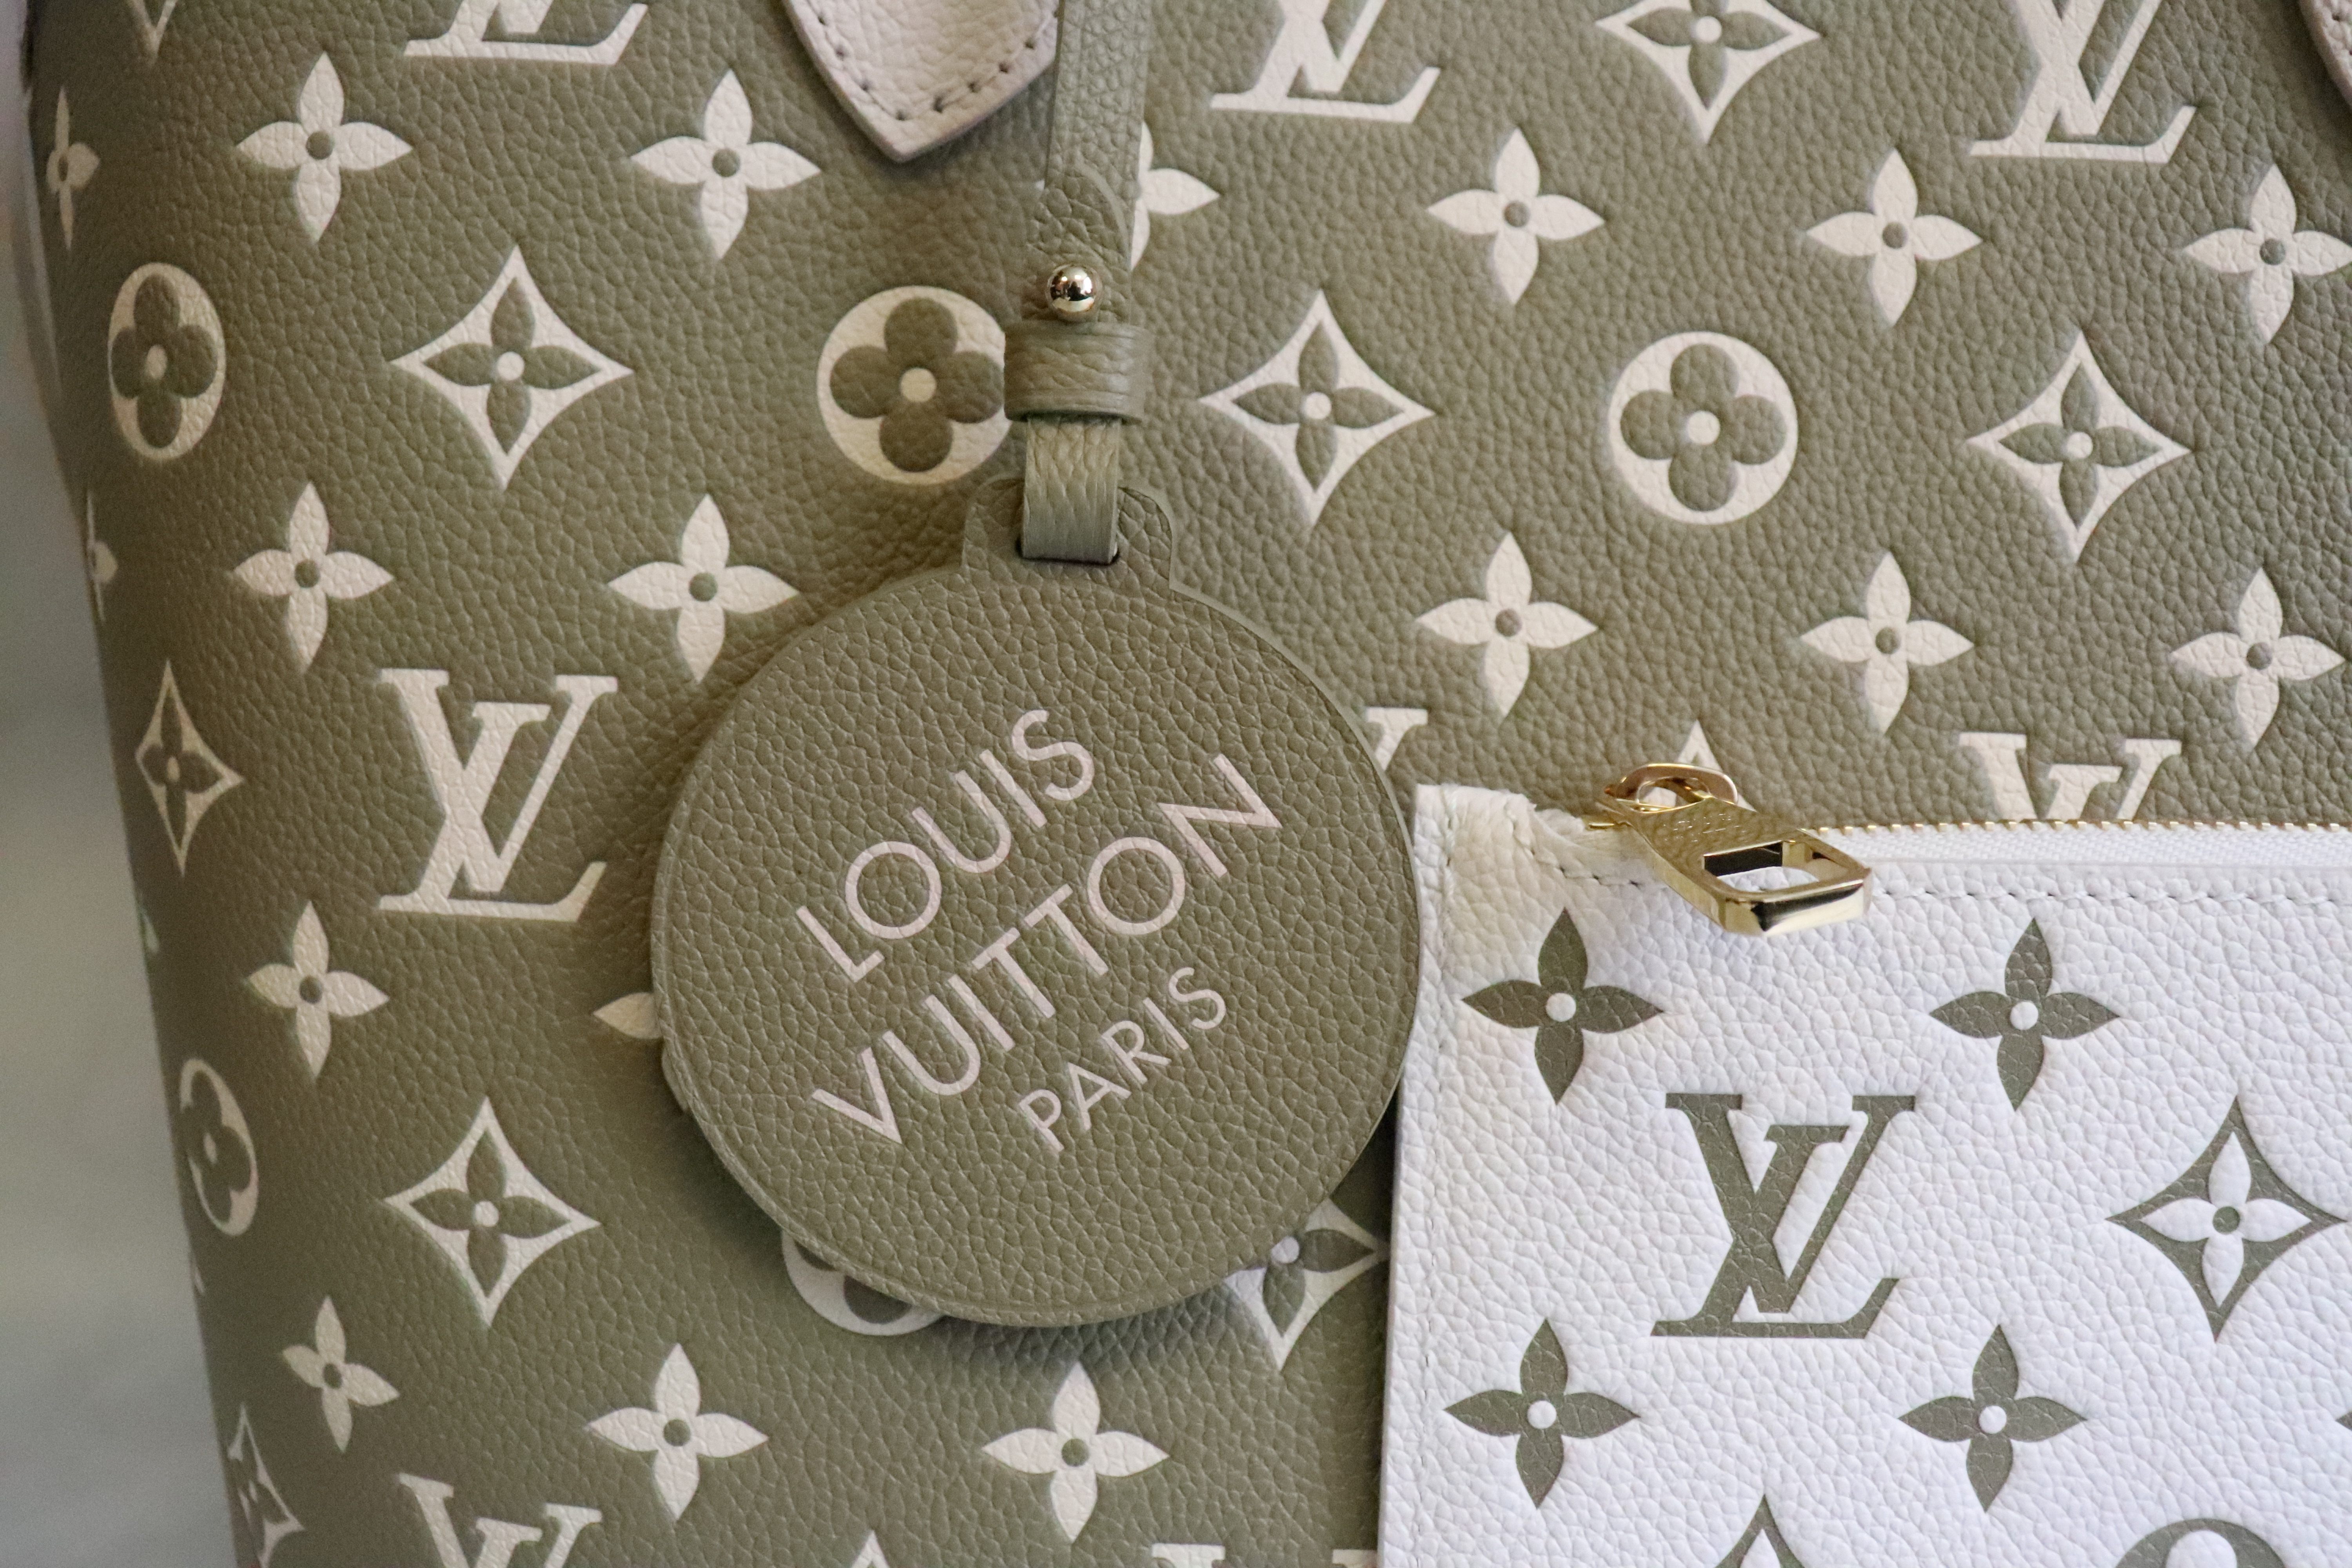 Louis Vuitton Neverfull MM with Pouch, Empreinte Leather Khaki and Beige,  New in Dustbag - Julia Rose Boston